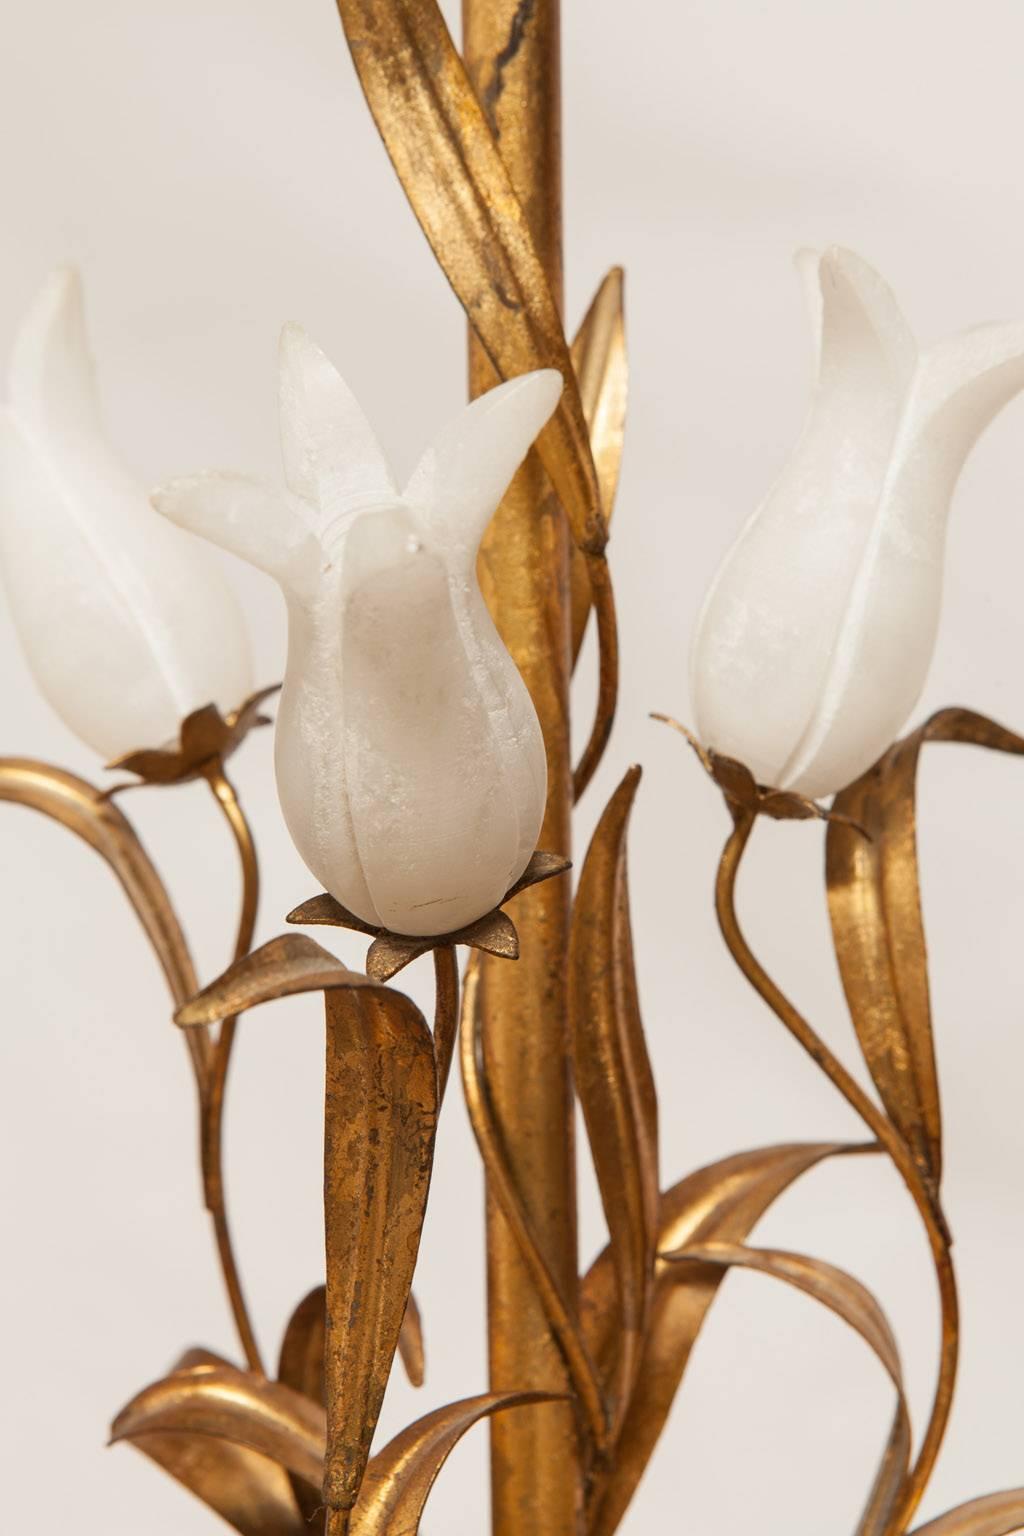 Charming gilt metal table lamp featuring carved alabaster flowers and vase on a shaped giltwood base. Whimsical flowing foliate and scrolls climb up the column and terminate with a large gilt finial. Shade not included. Made in Italy in the